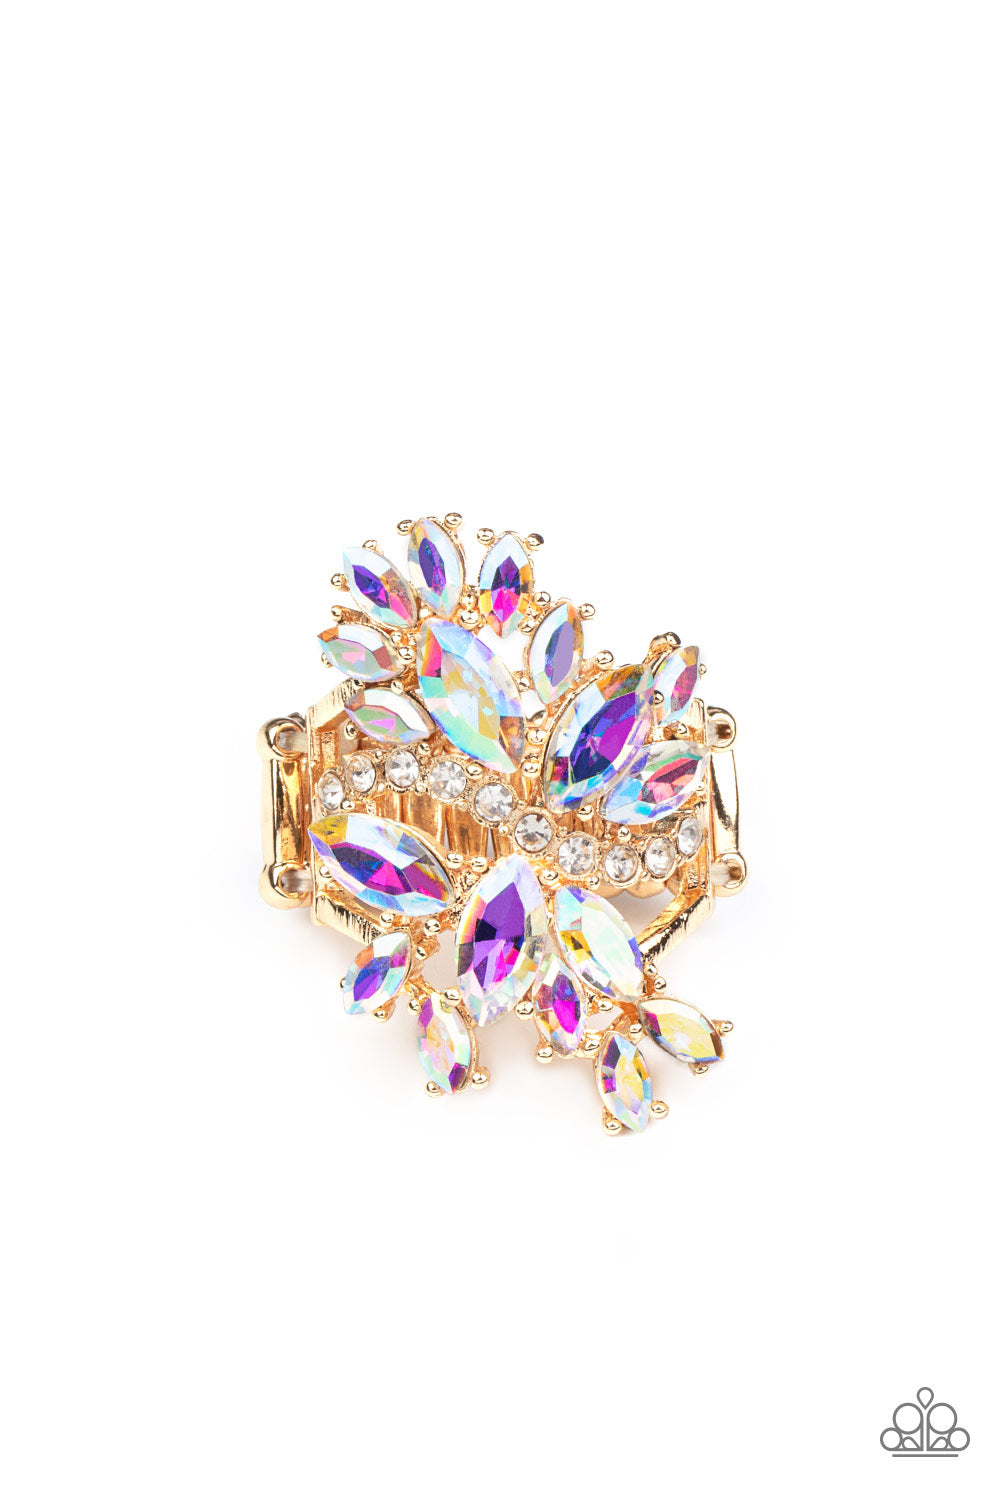 Flauntable Flare Gold Ring - Paparazzi Accessories  An explosion of iridescent marquise cut rhinestones flare out from a wavy band of dainty white rhinestones, creating a glamorously golden centerpiece atop the finger. Features an adjustable clasp closure.  Sold as one individual ring.